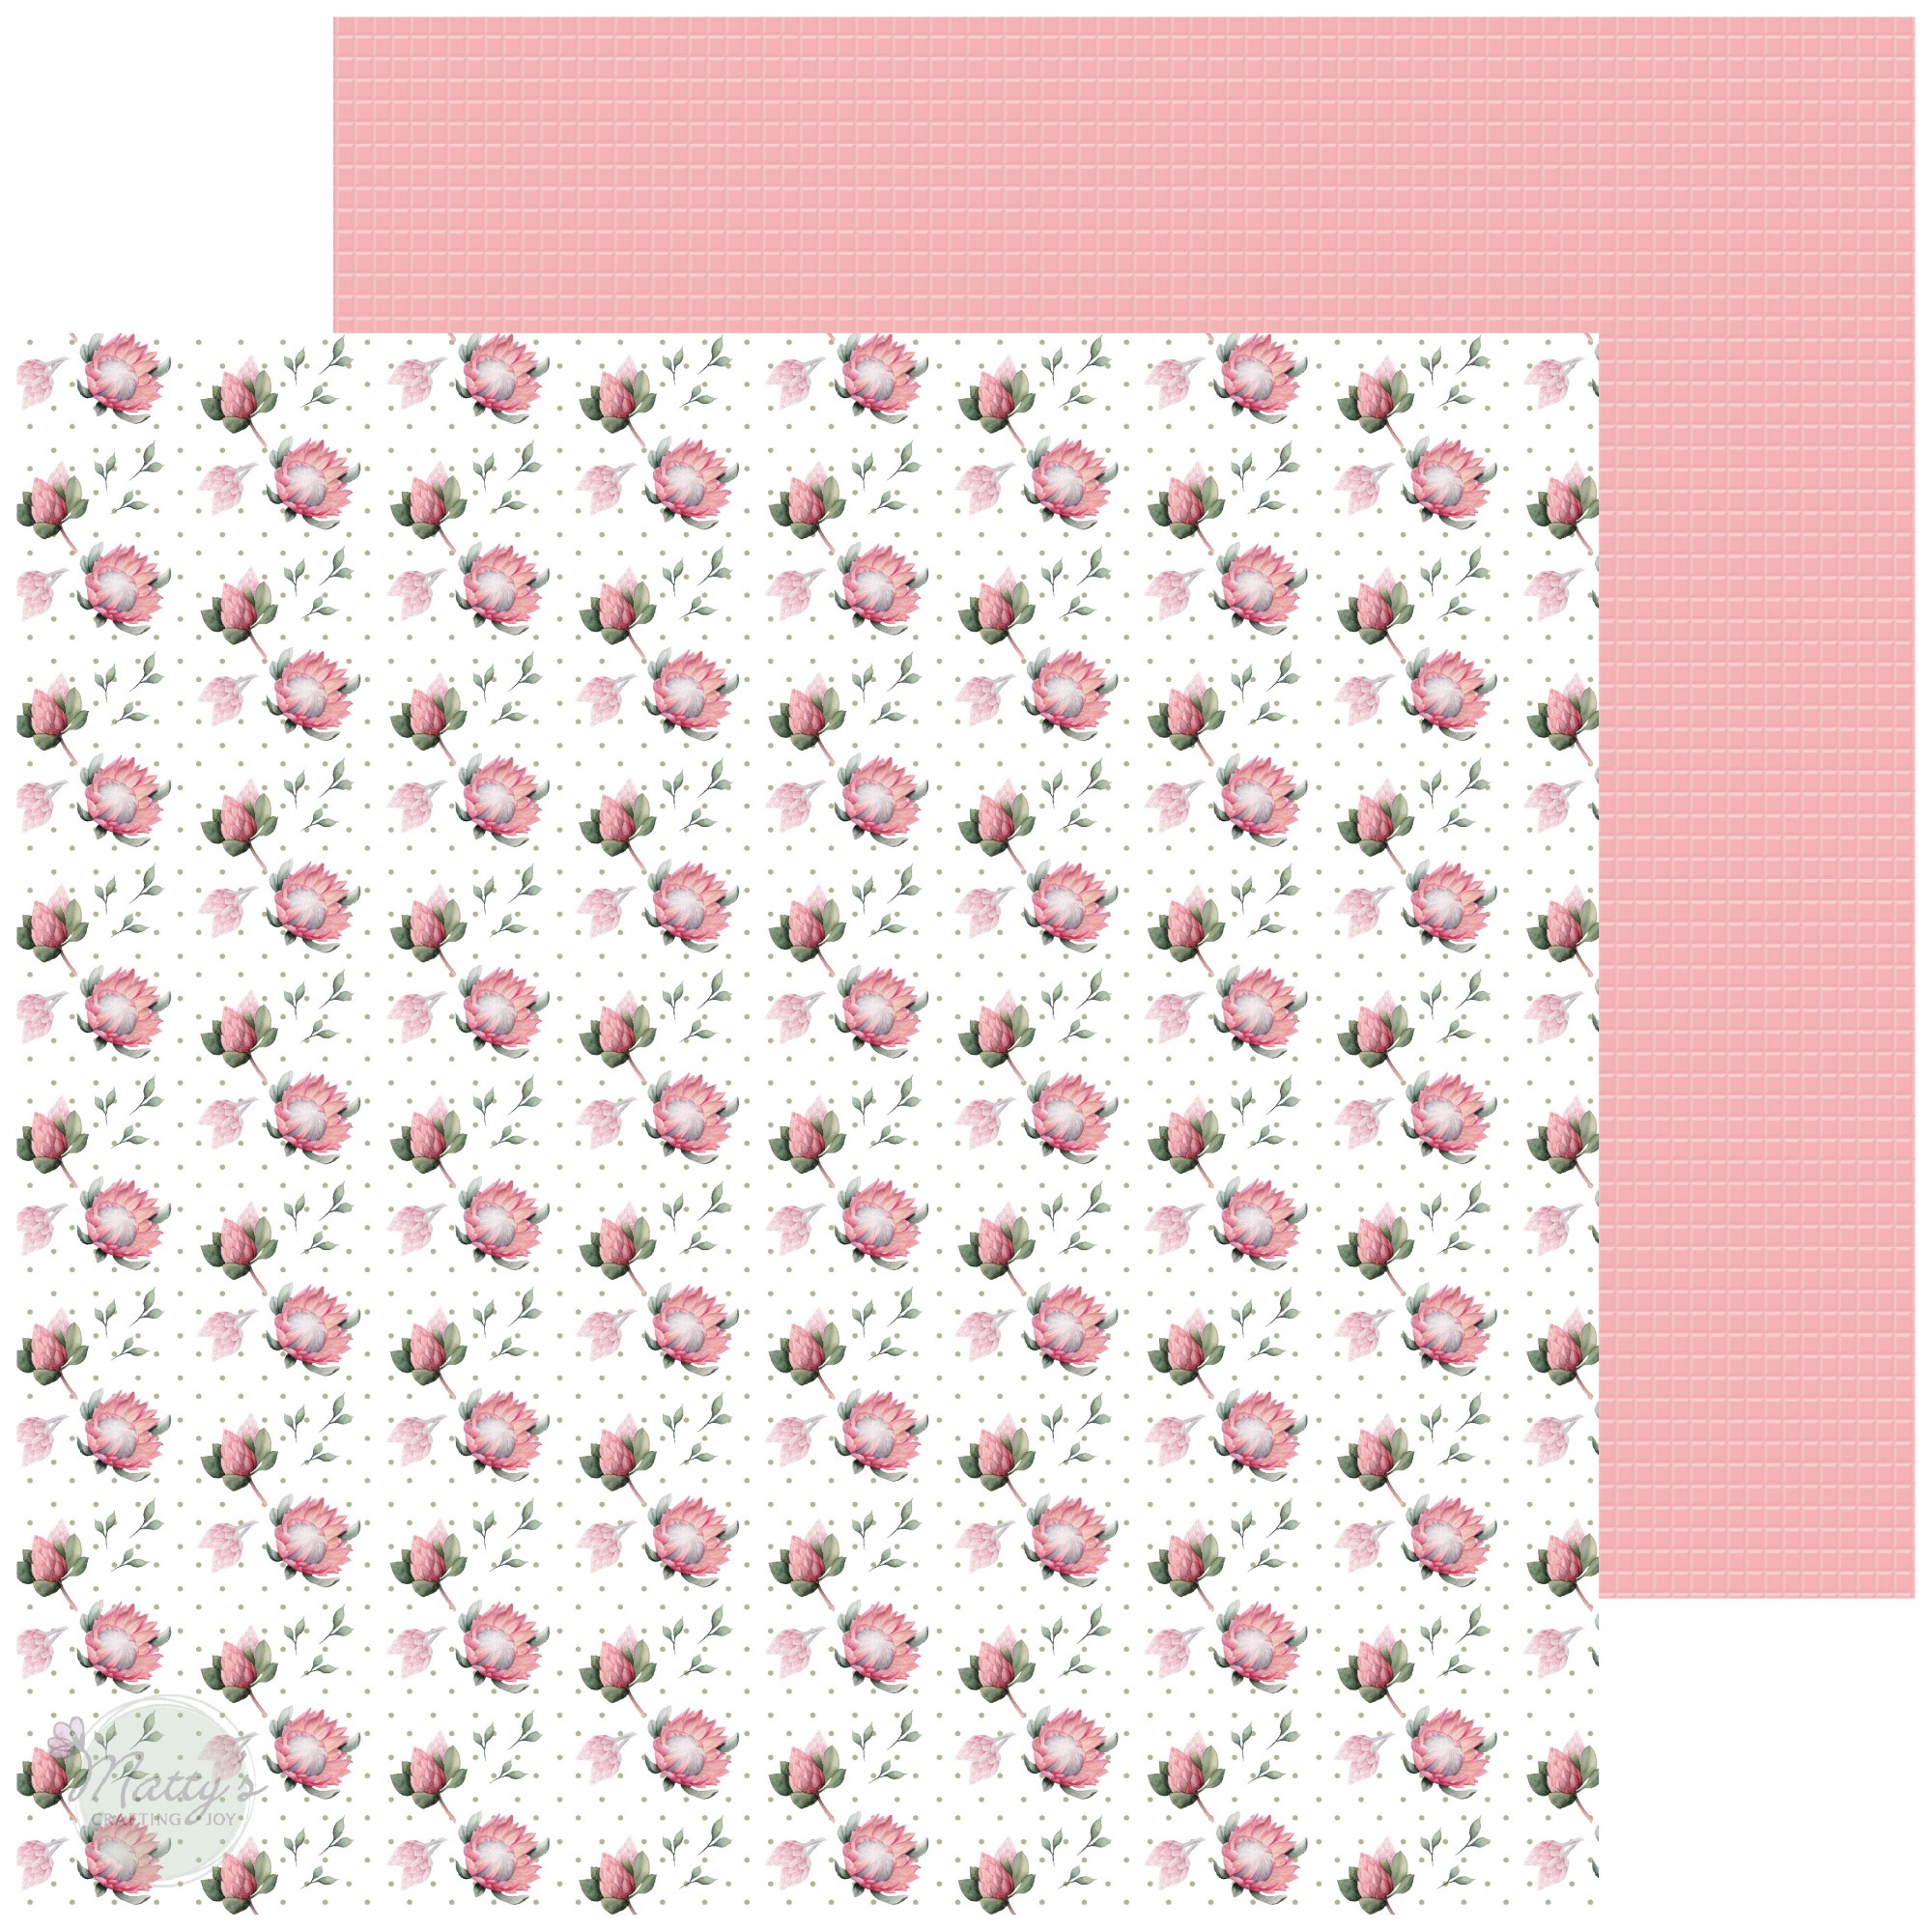 Spring Time Floral Scrapbook Papers 12x12 Printable Sheets Pastel Pink Mint  Green White